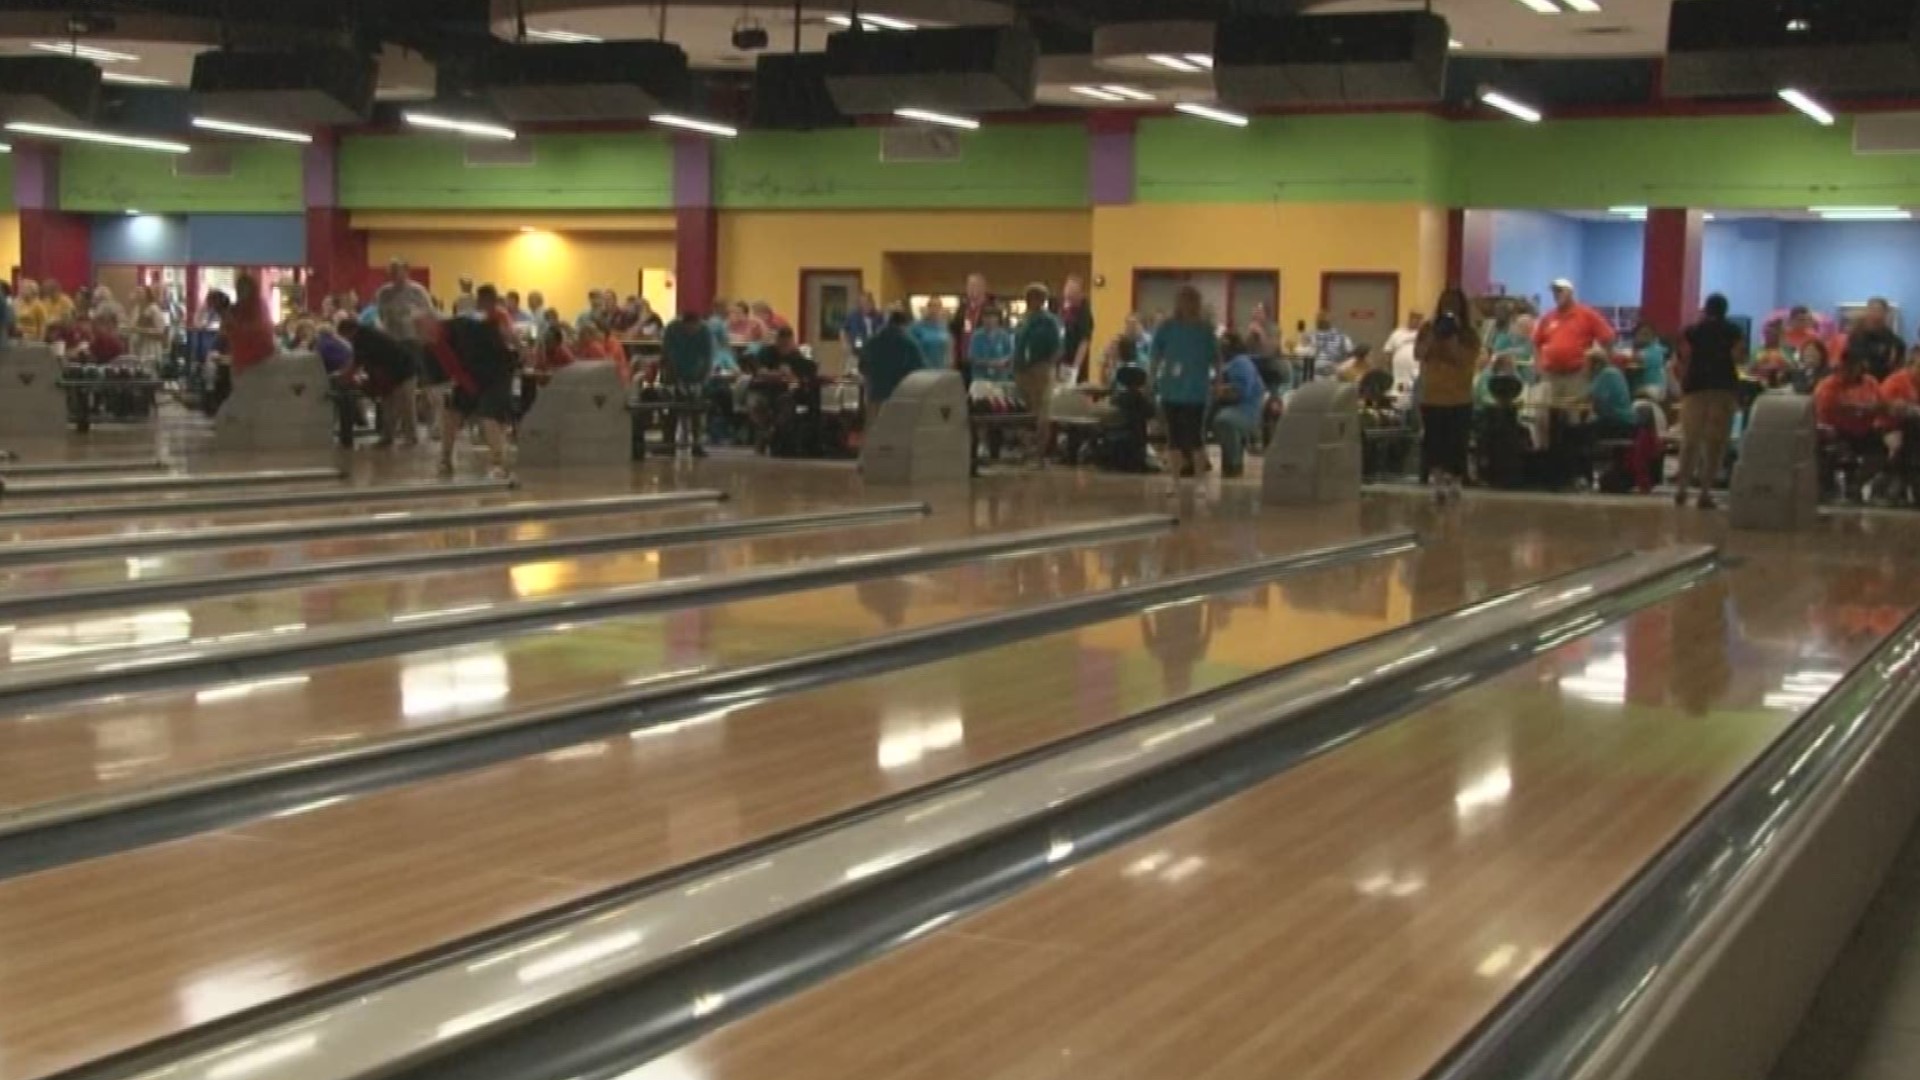 The Special Olympics Georgia State Masters Bowling Tournament was held Saturday in Warner Robins. Hundreds of Special Olympics athletes and coaches participated in the event held at Gold Cup Lanes and Robins Lanes.